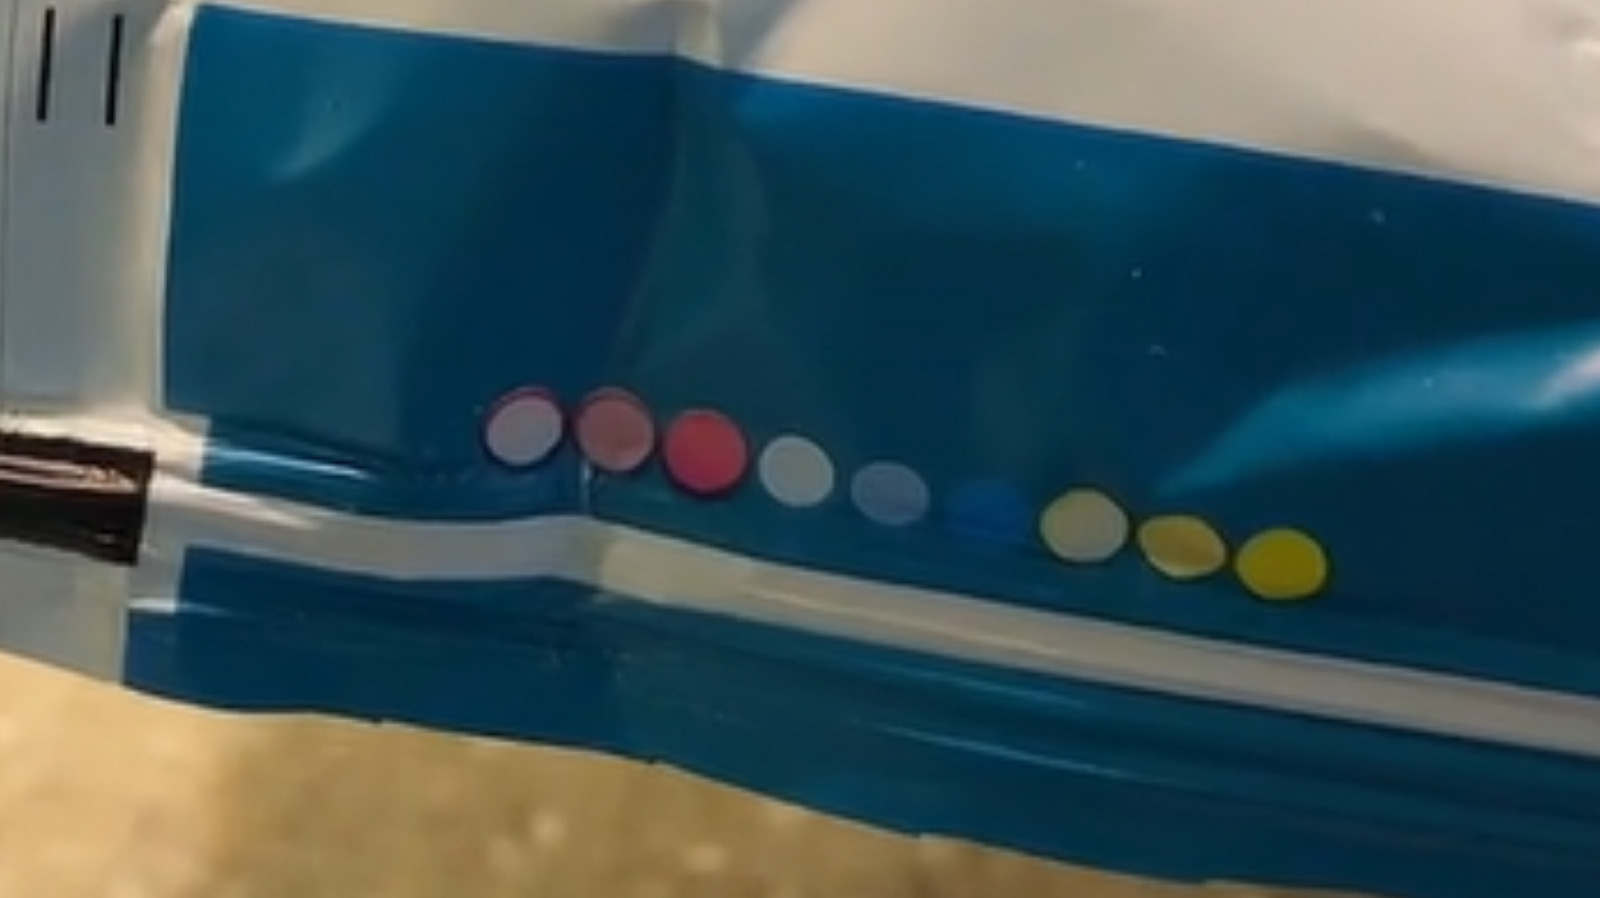 What Do The Colorful Circles on Food Packaging Mean?